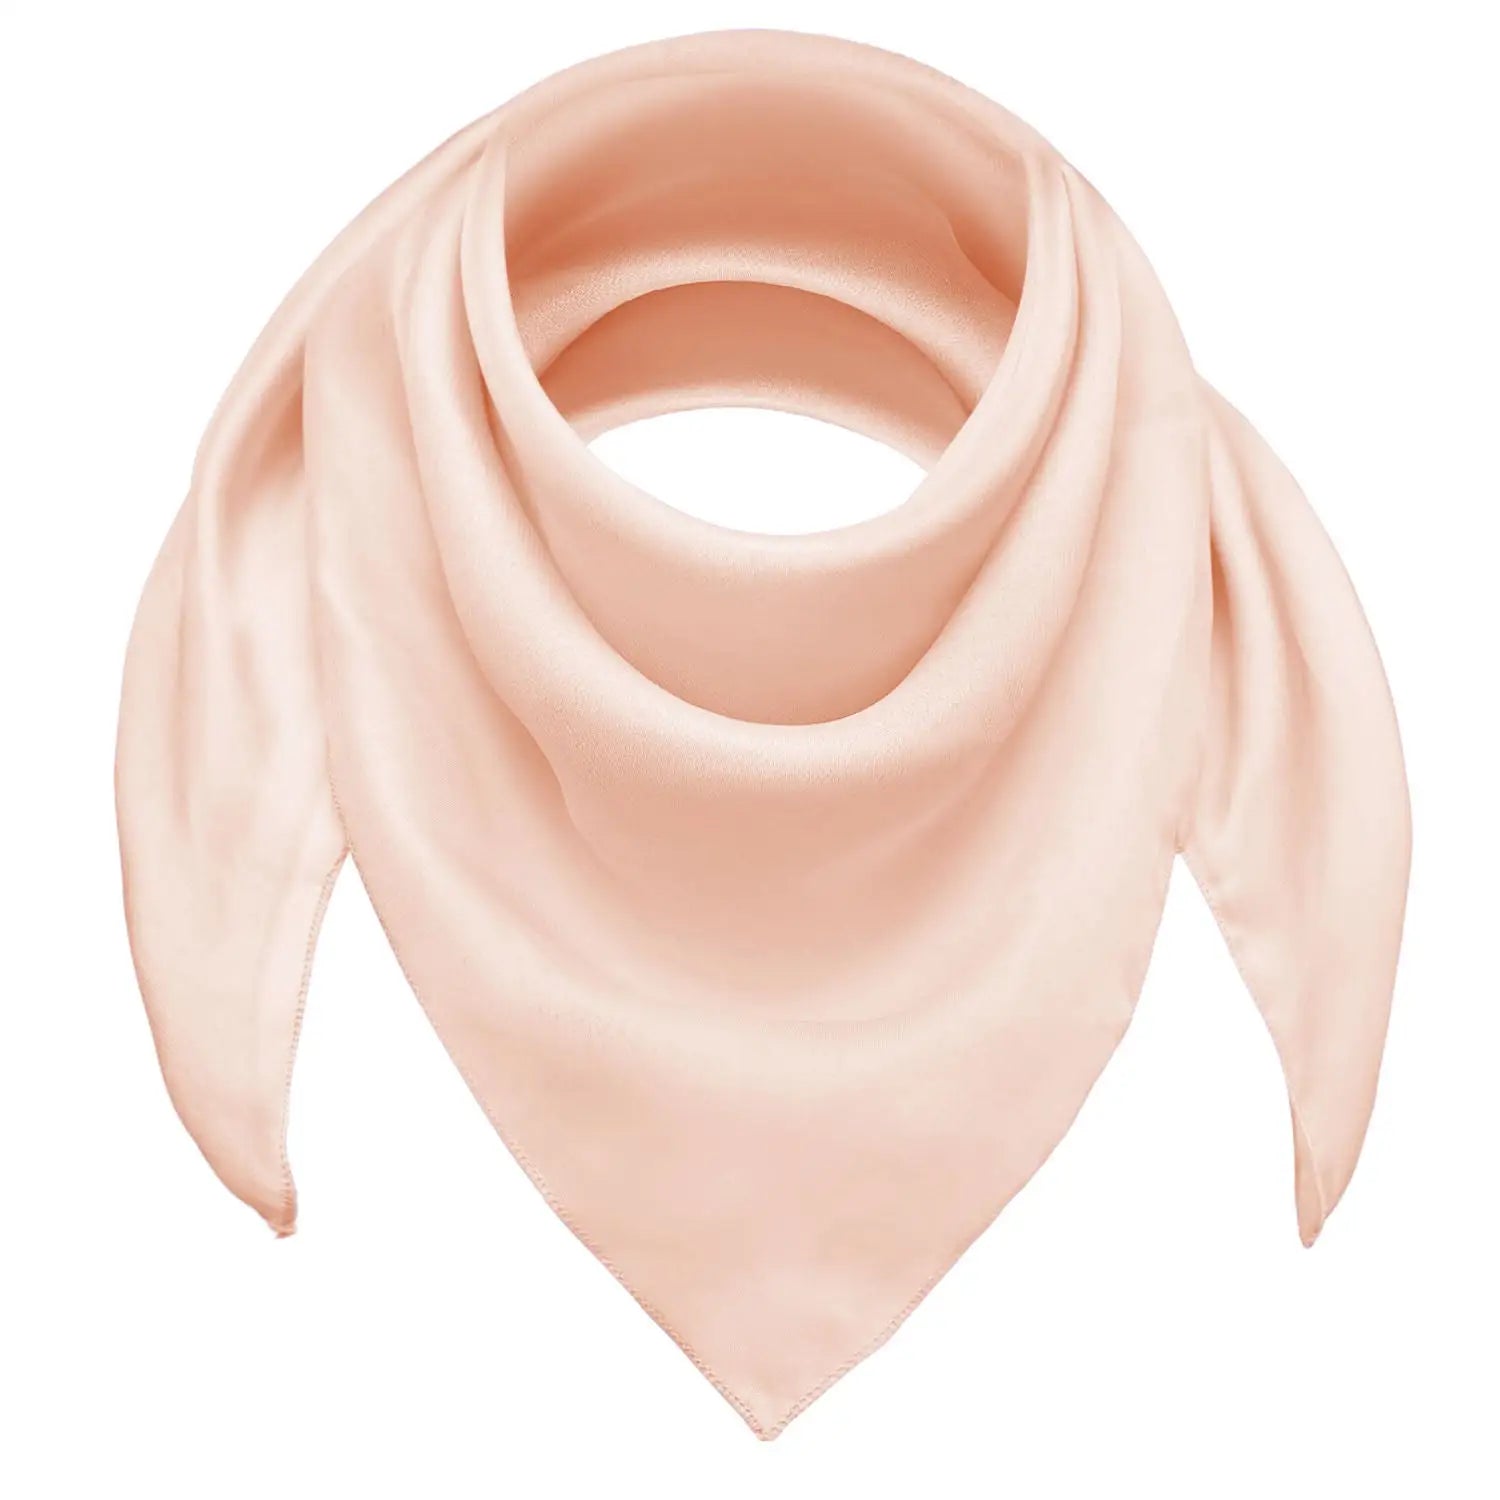 Pink chiffon square scarf on white background - Lightweight women’s neck scarf